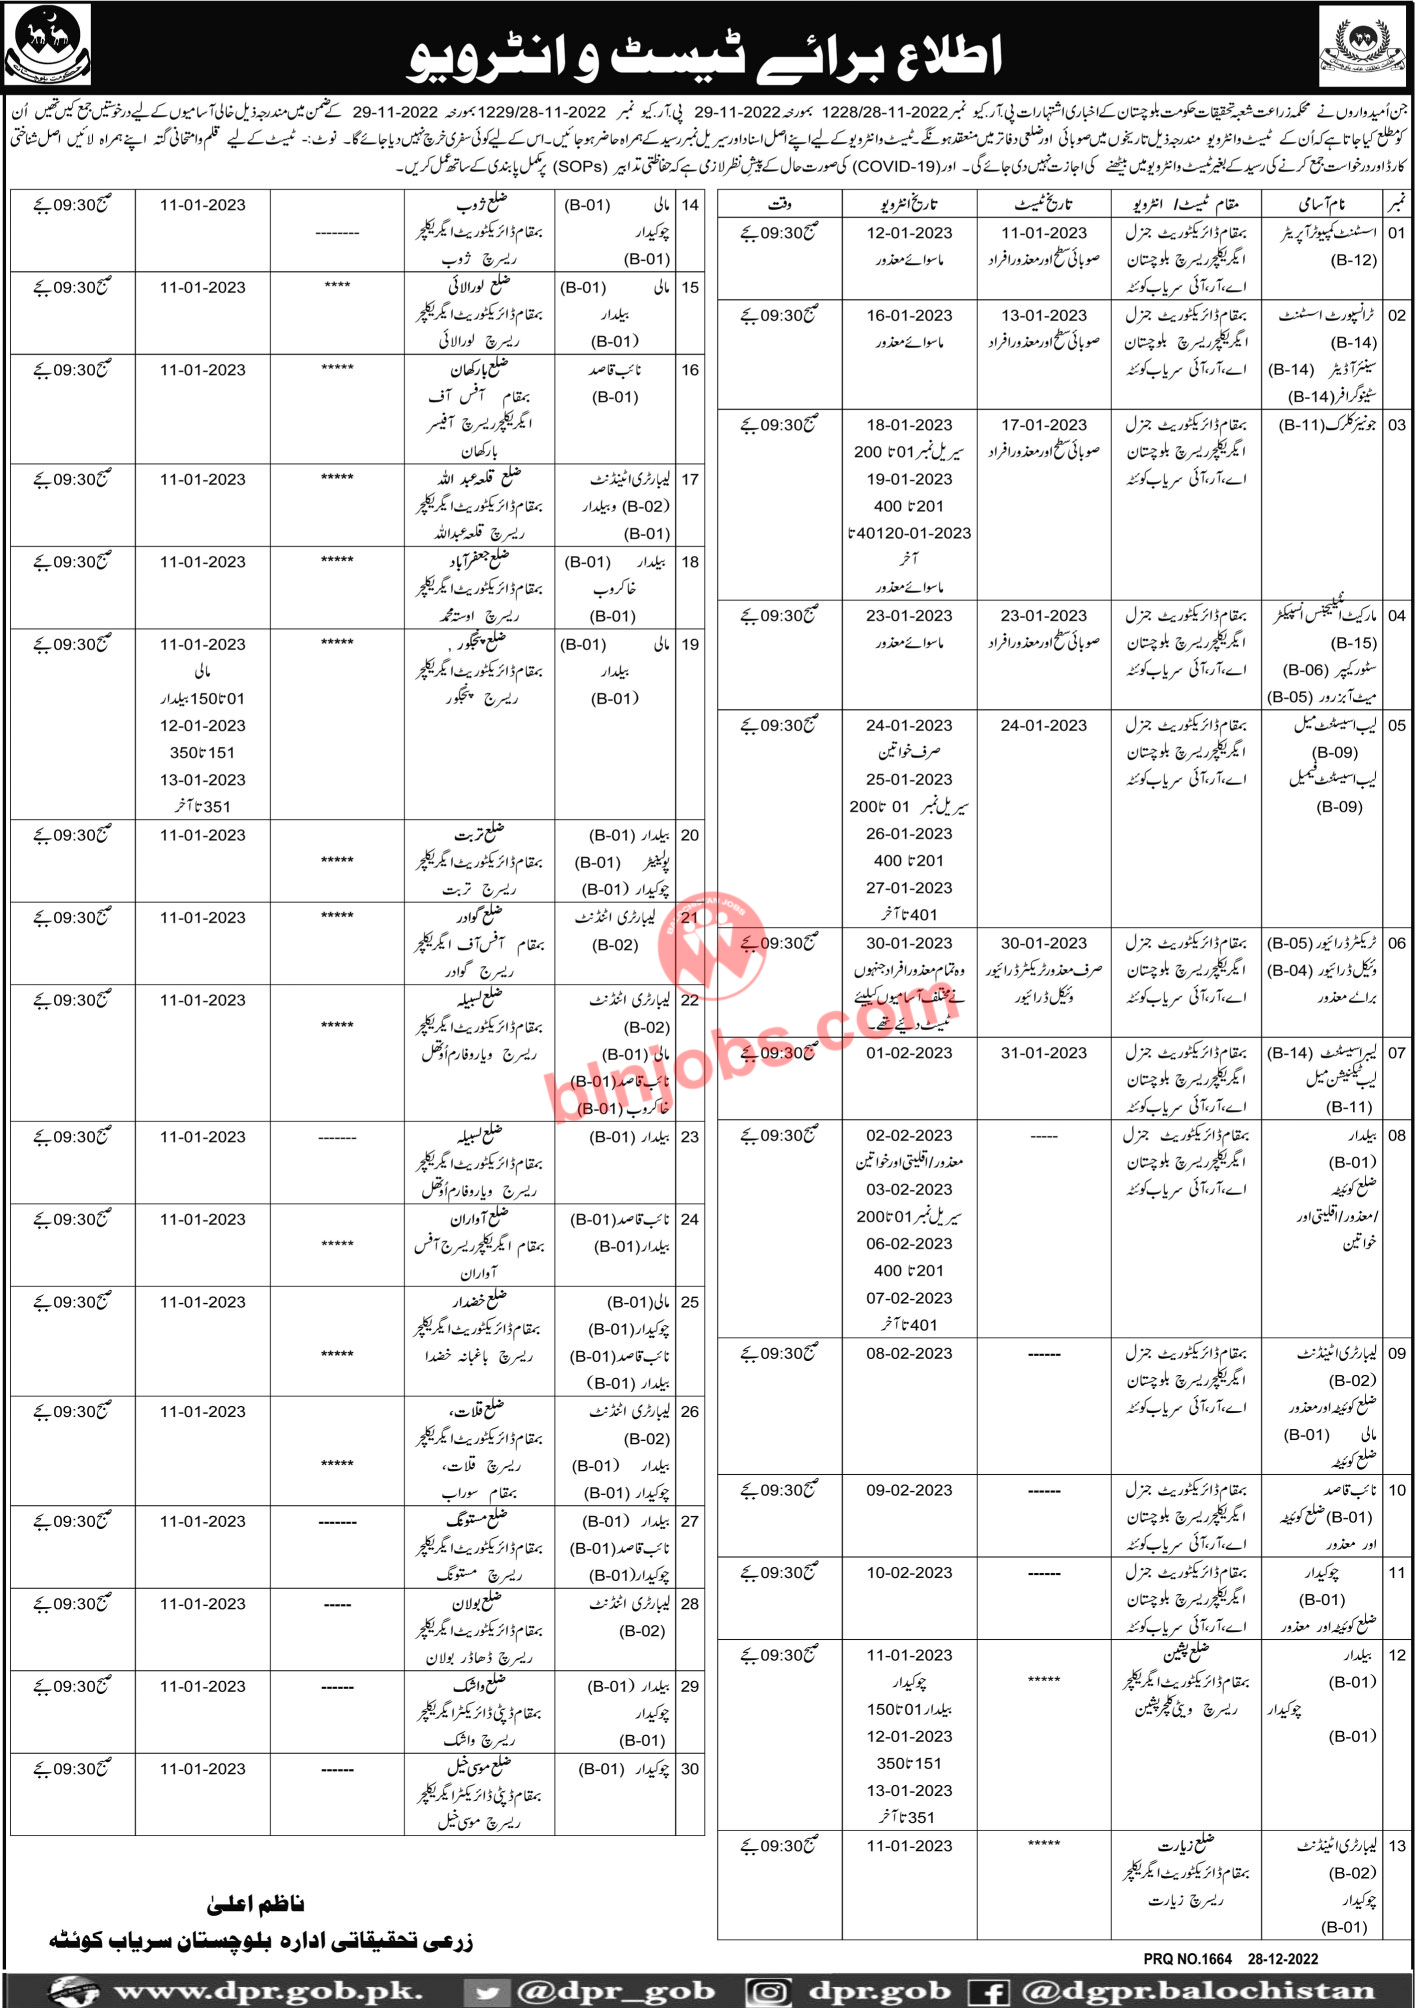 Agriculture Research Department Balochistan Test Interview Schedule 2023